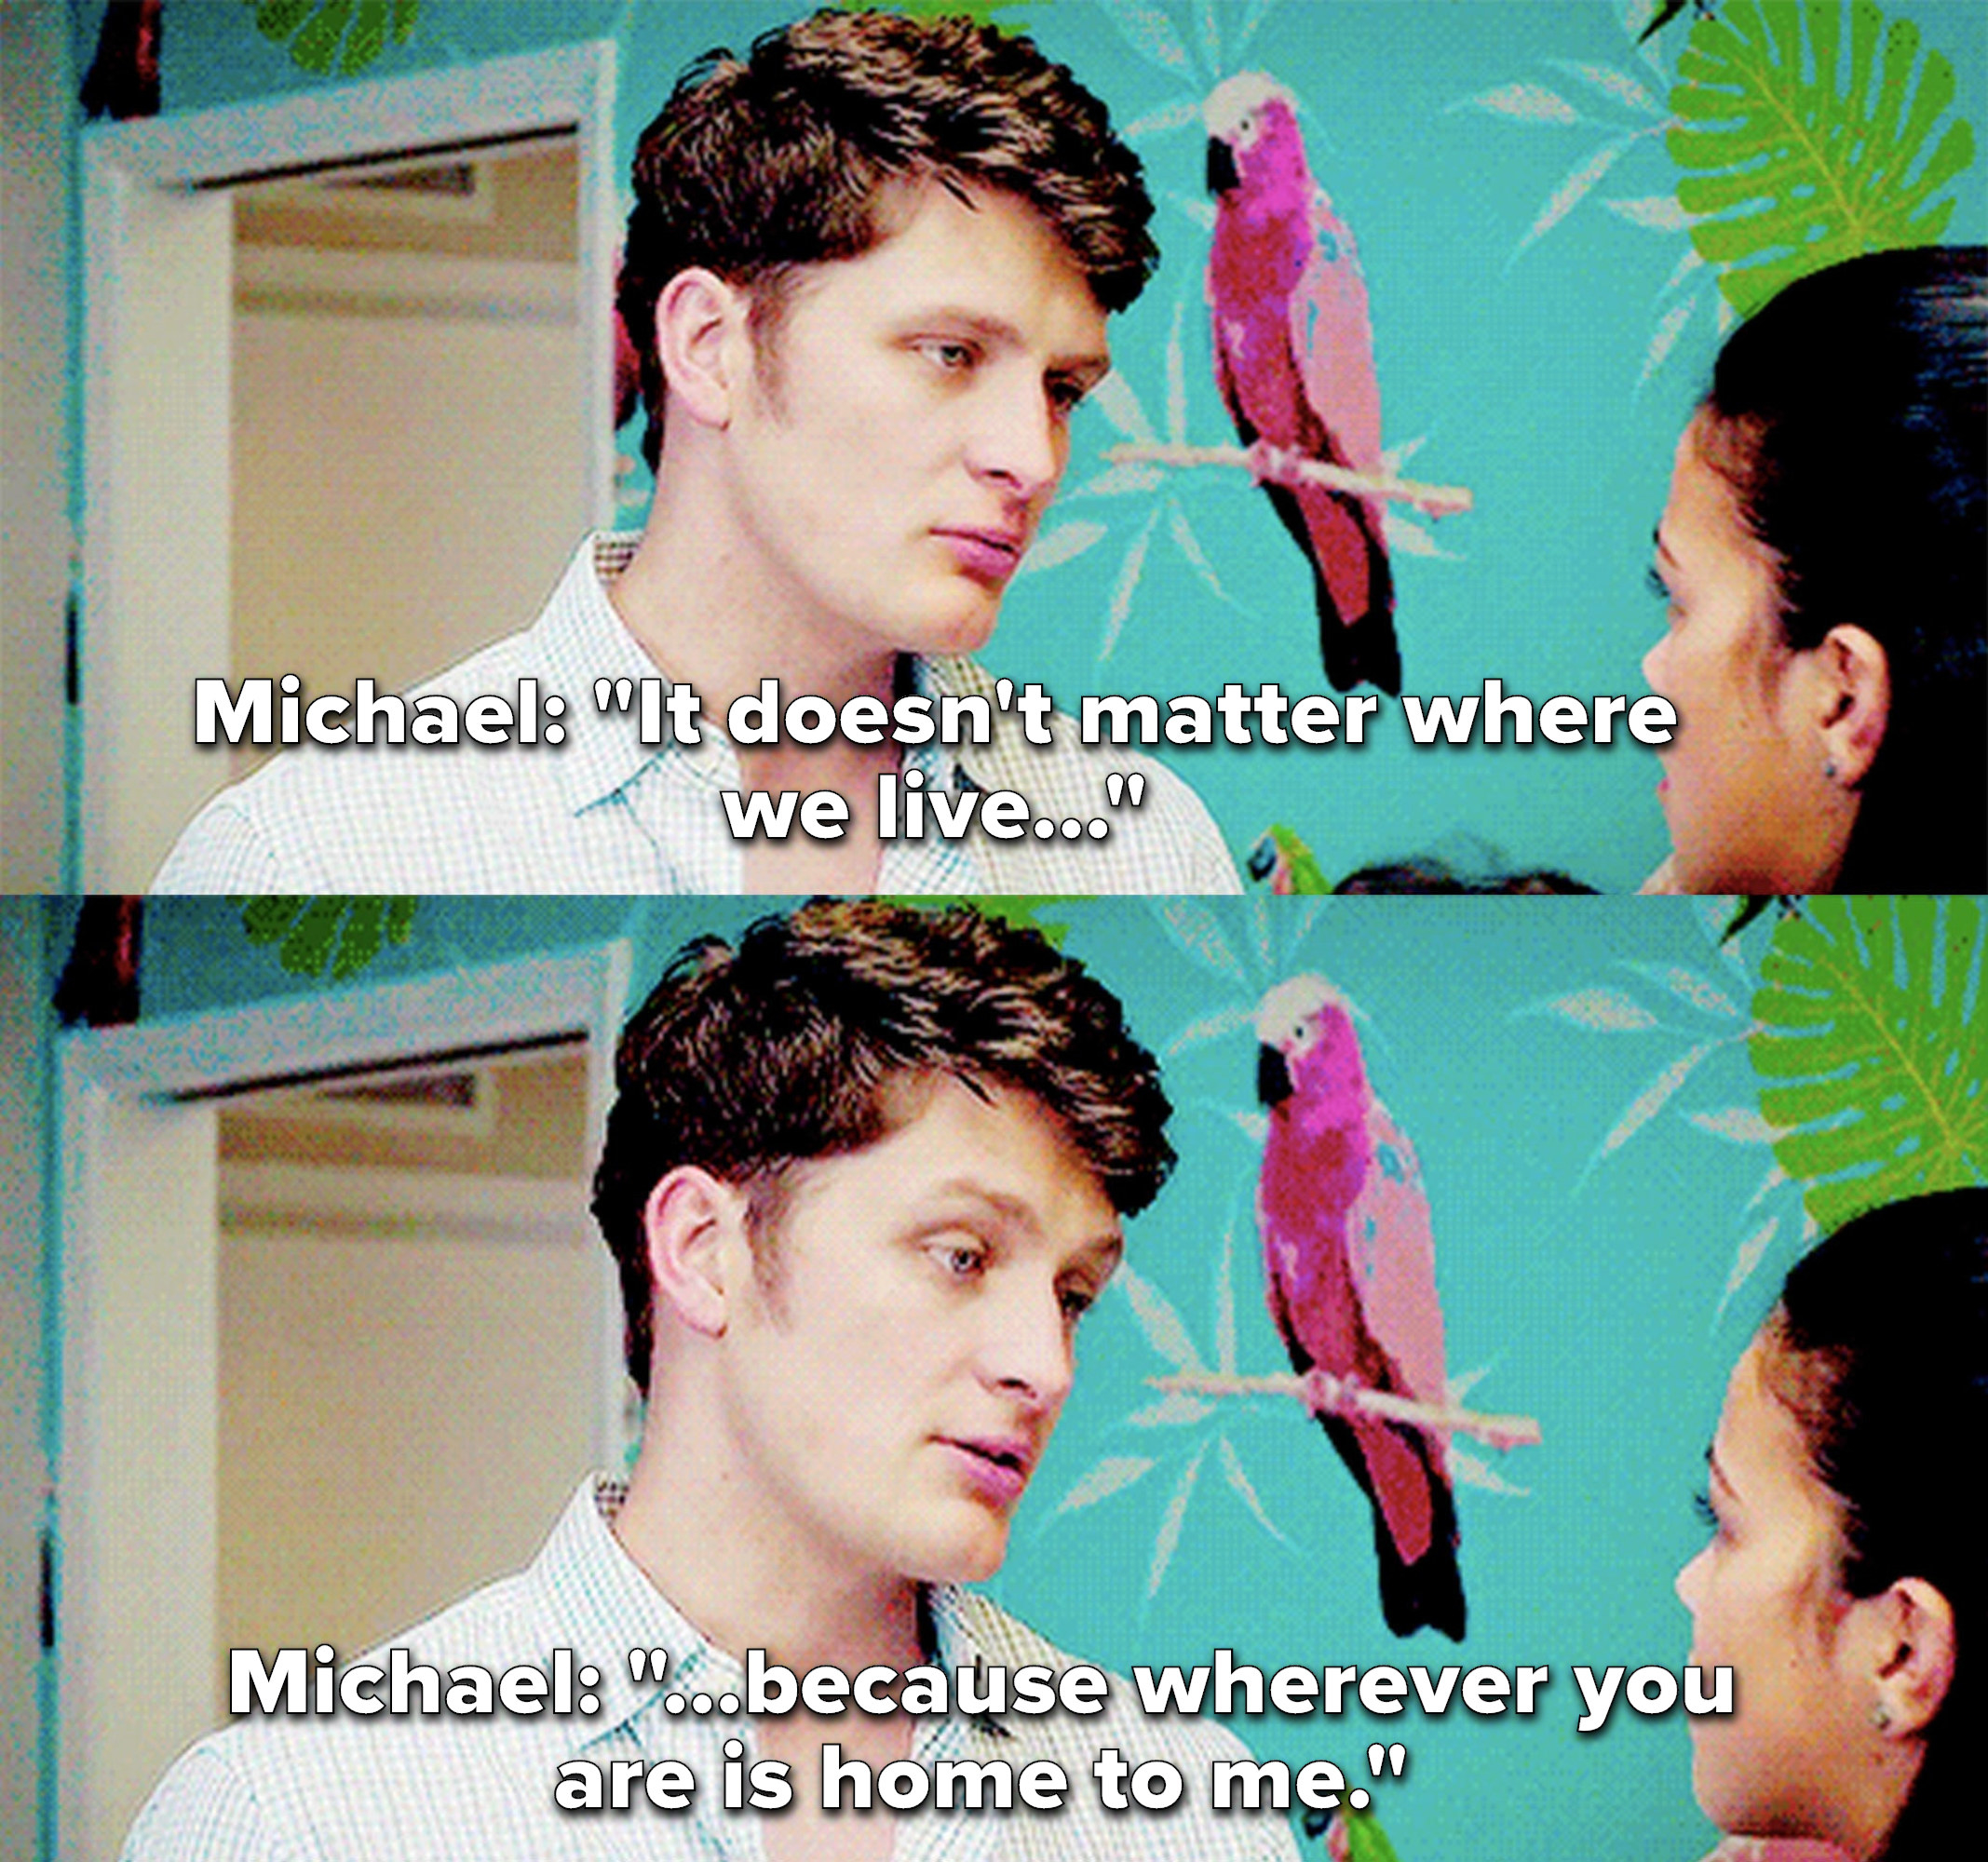 Michael says &quot;It doesn&#x27;t matter where we live because wherever you are is home to me&quot;